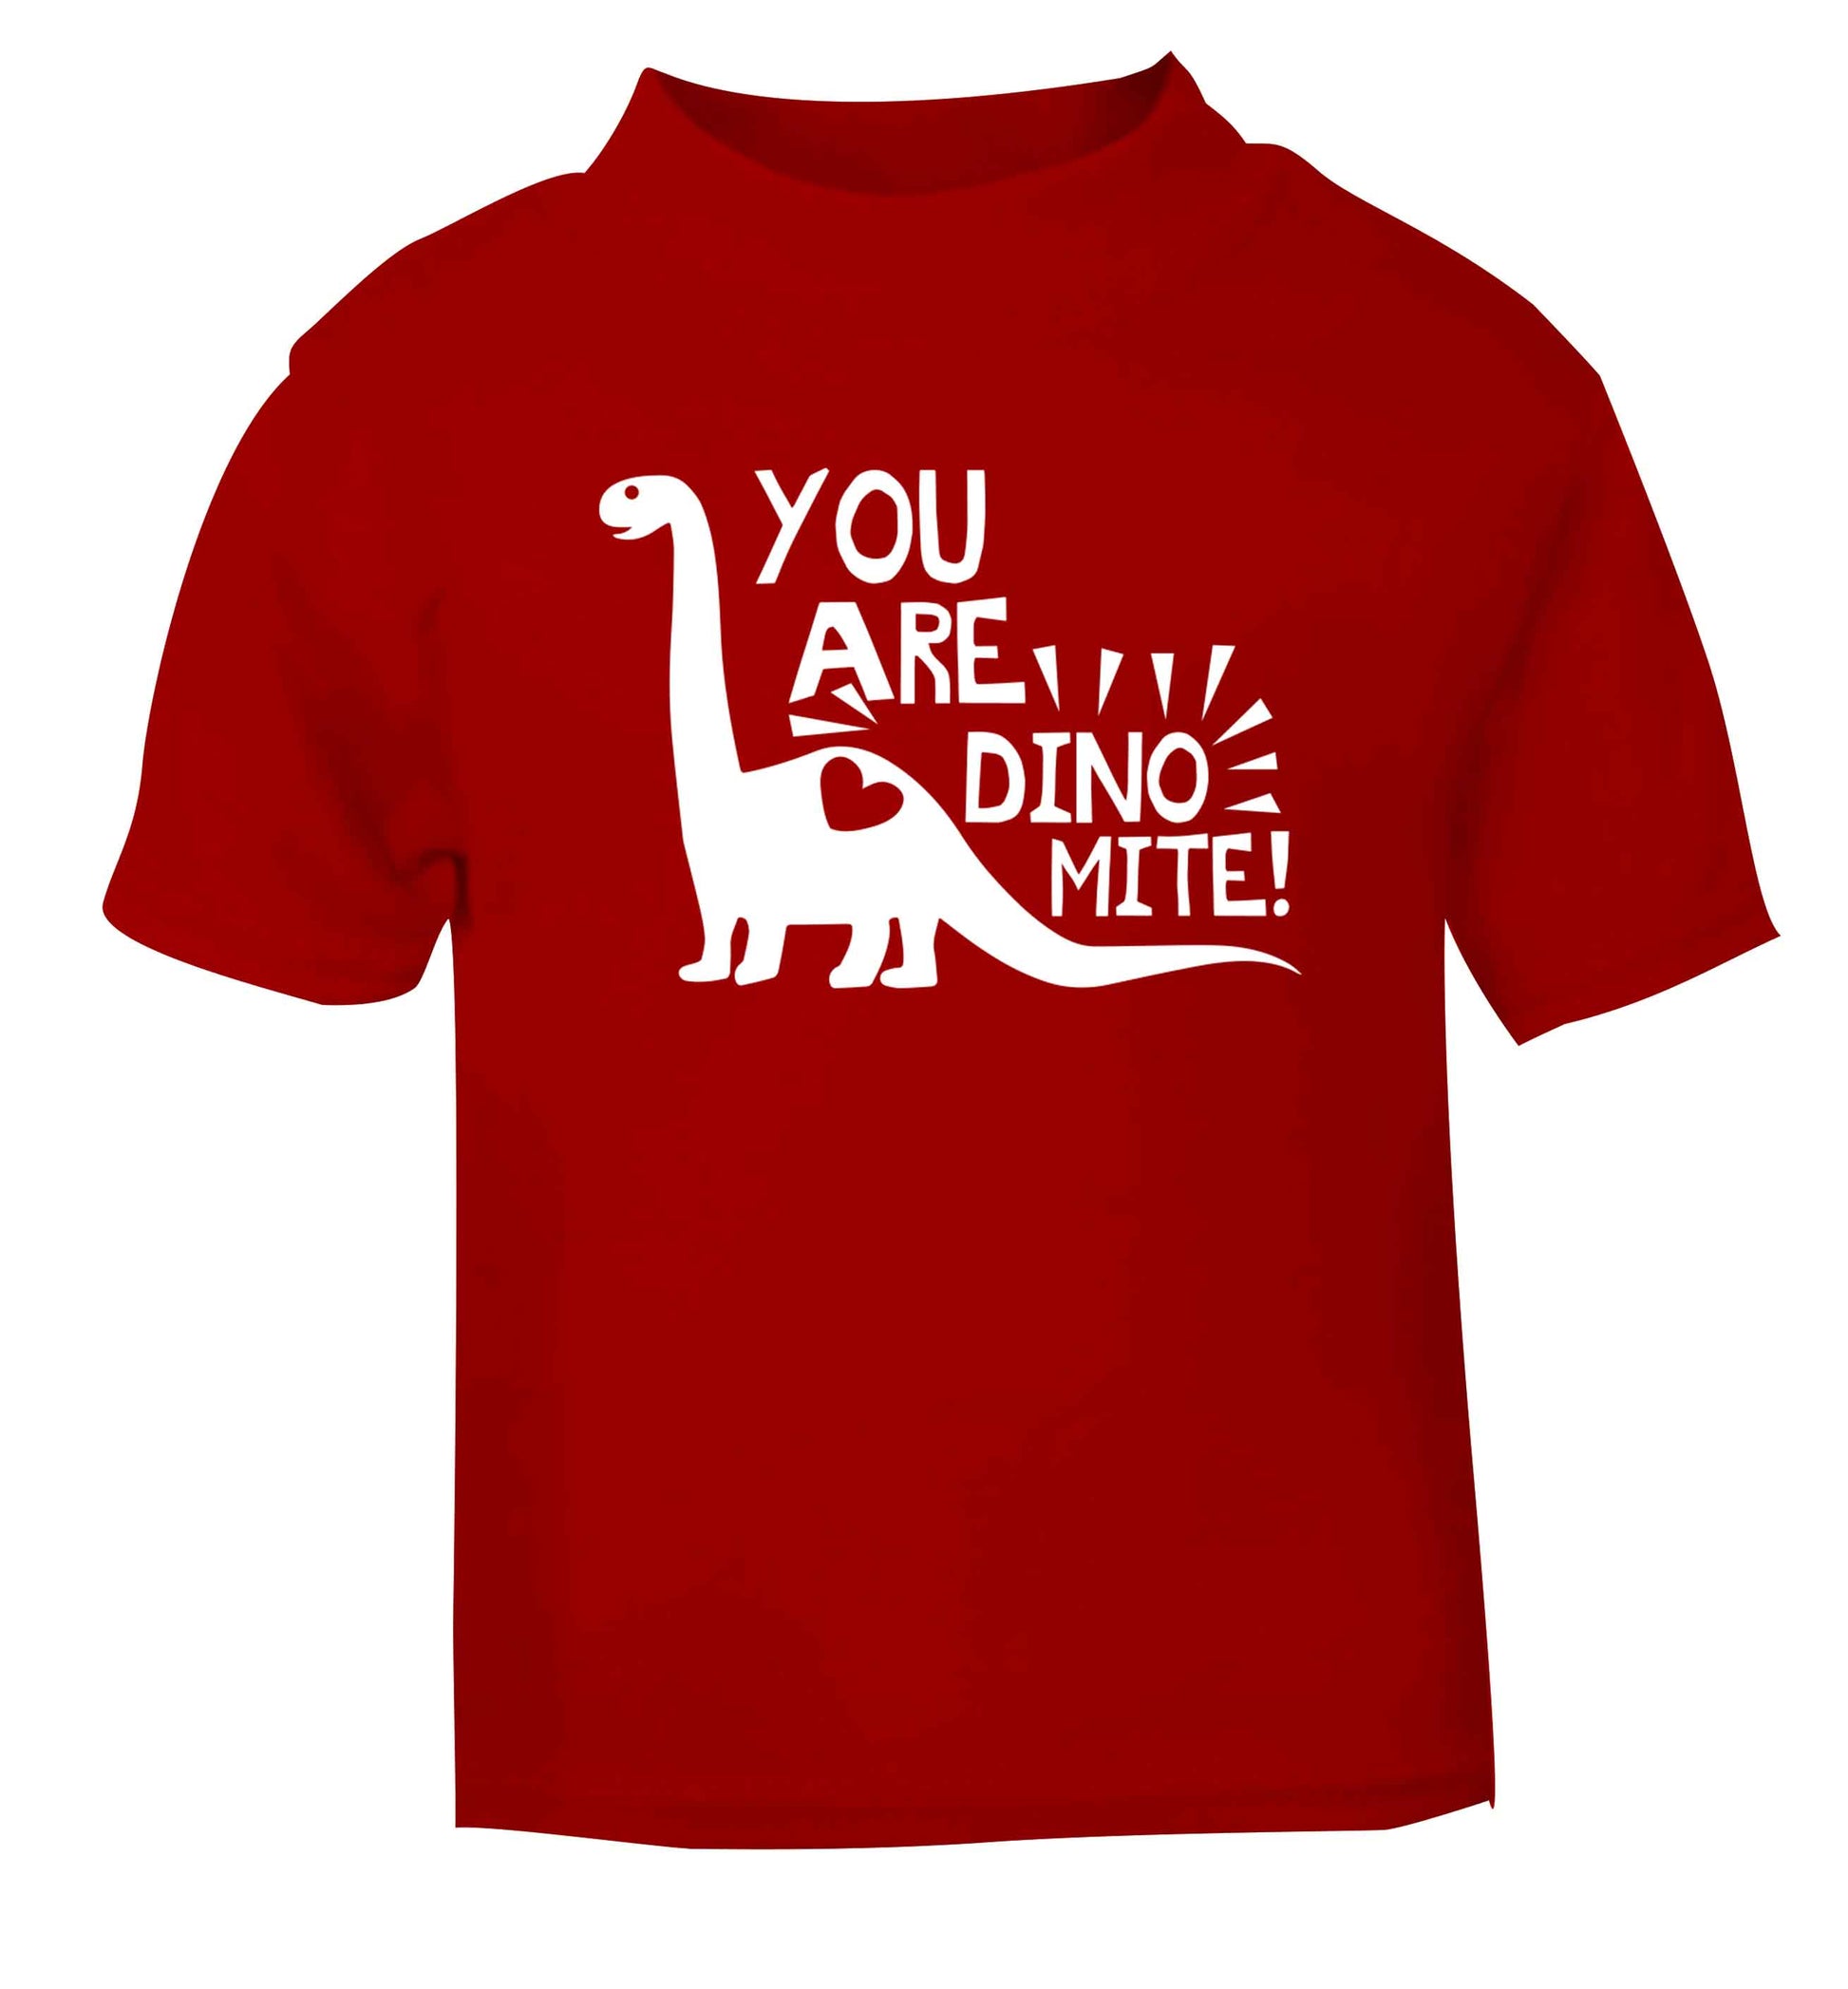 You are dinomite! red Baby Toddler Tshirt 2 Years